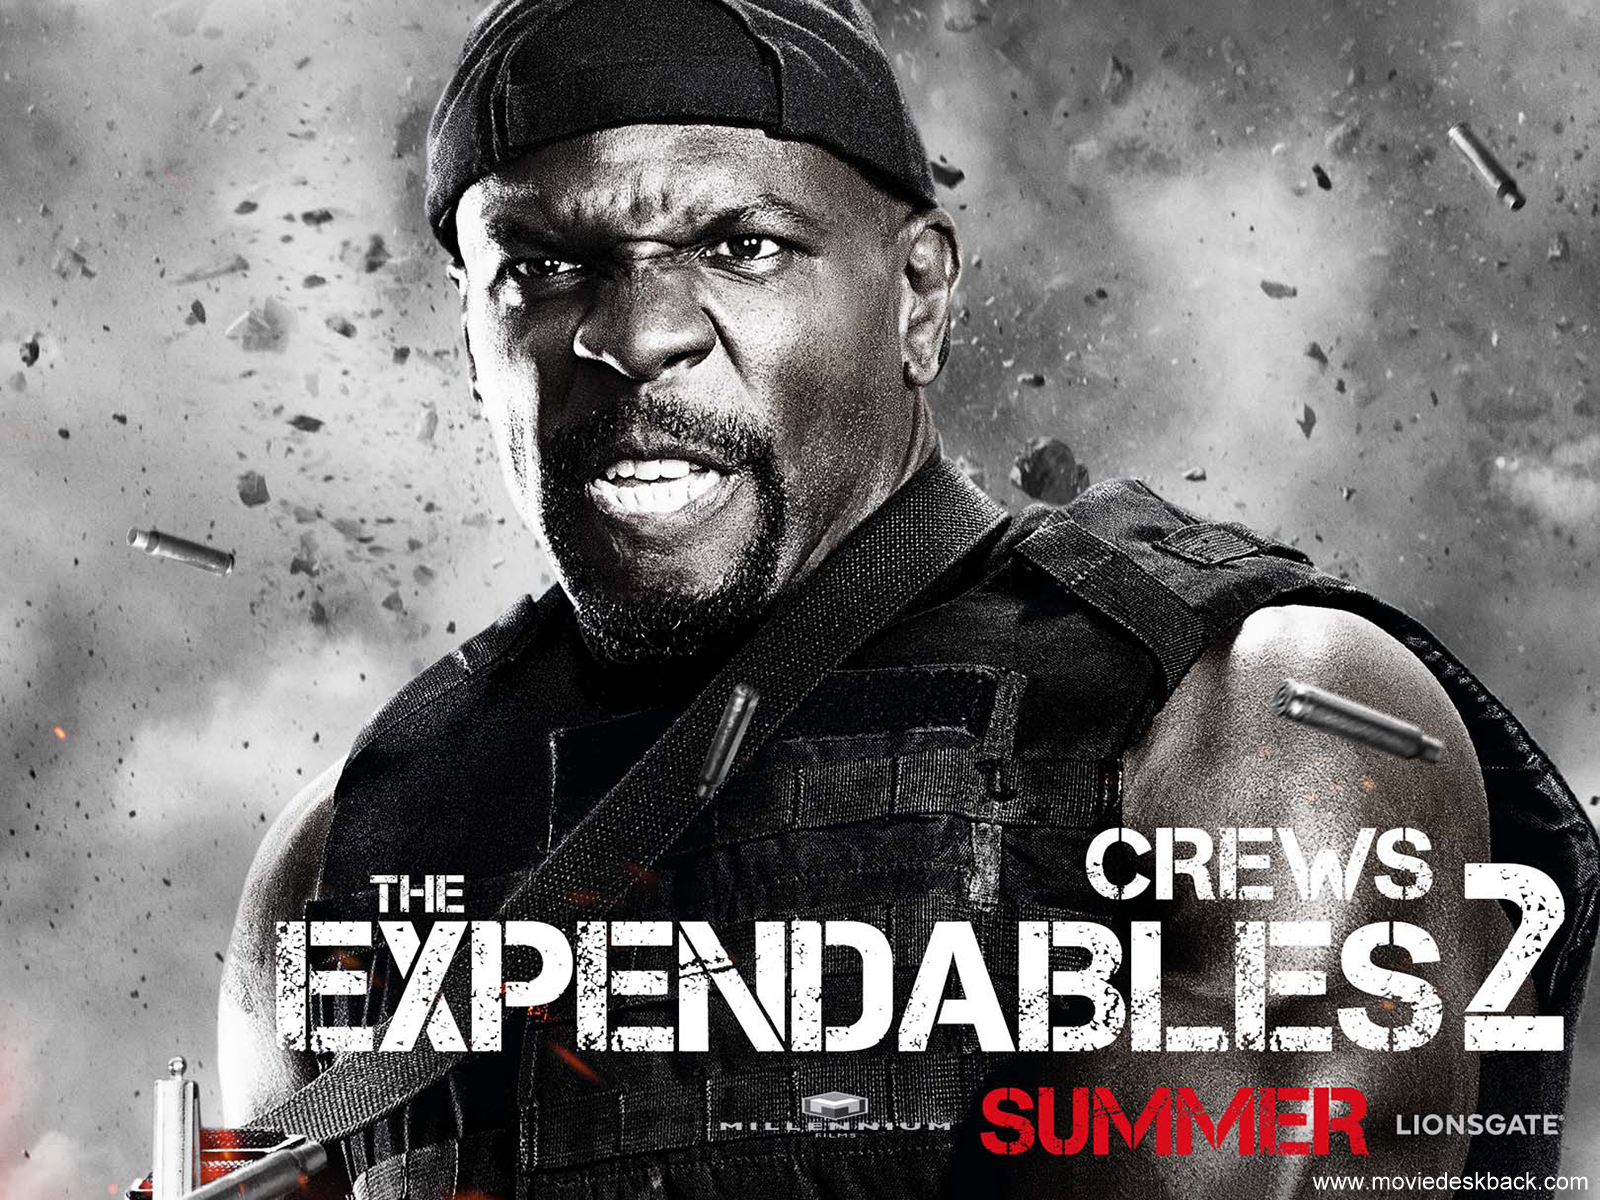 The Expendables - Expendables 2 Terry Crews - HD Wallpaper 